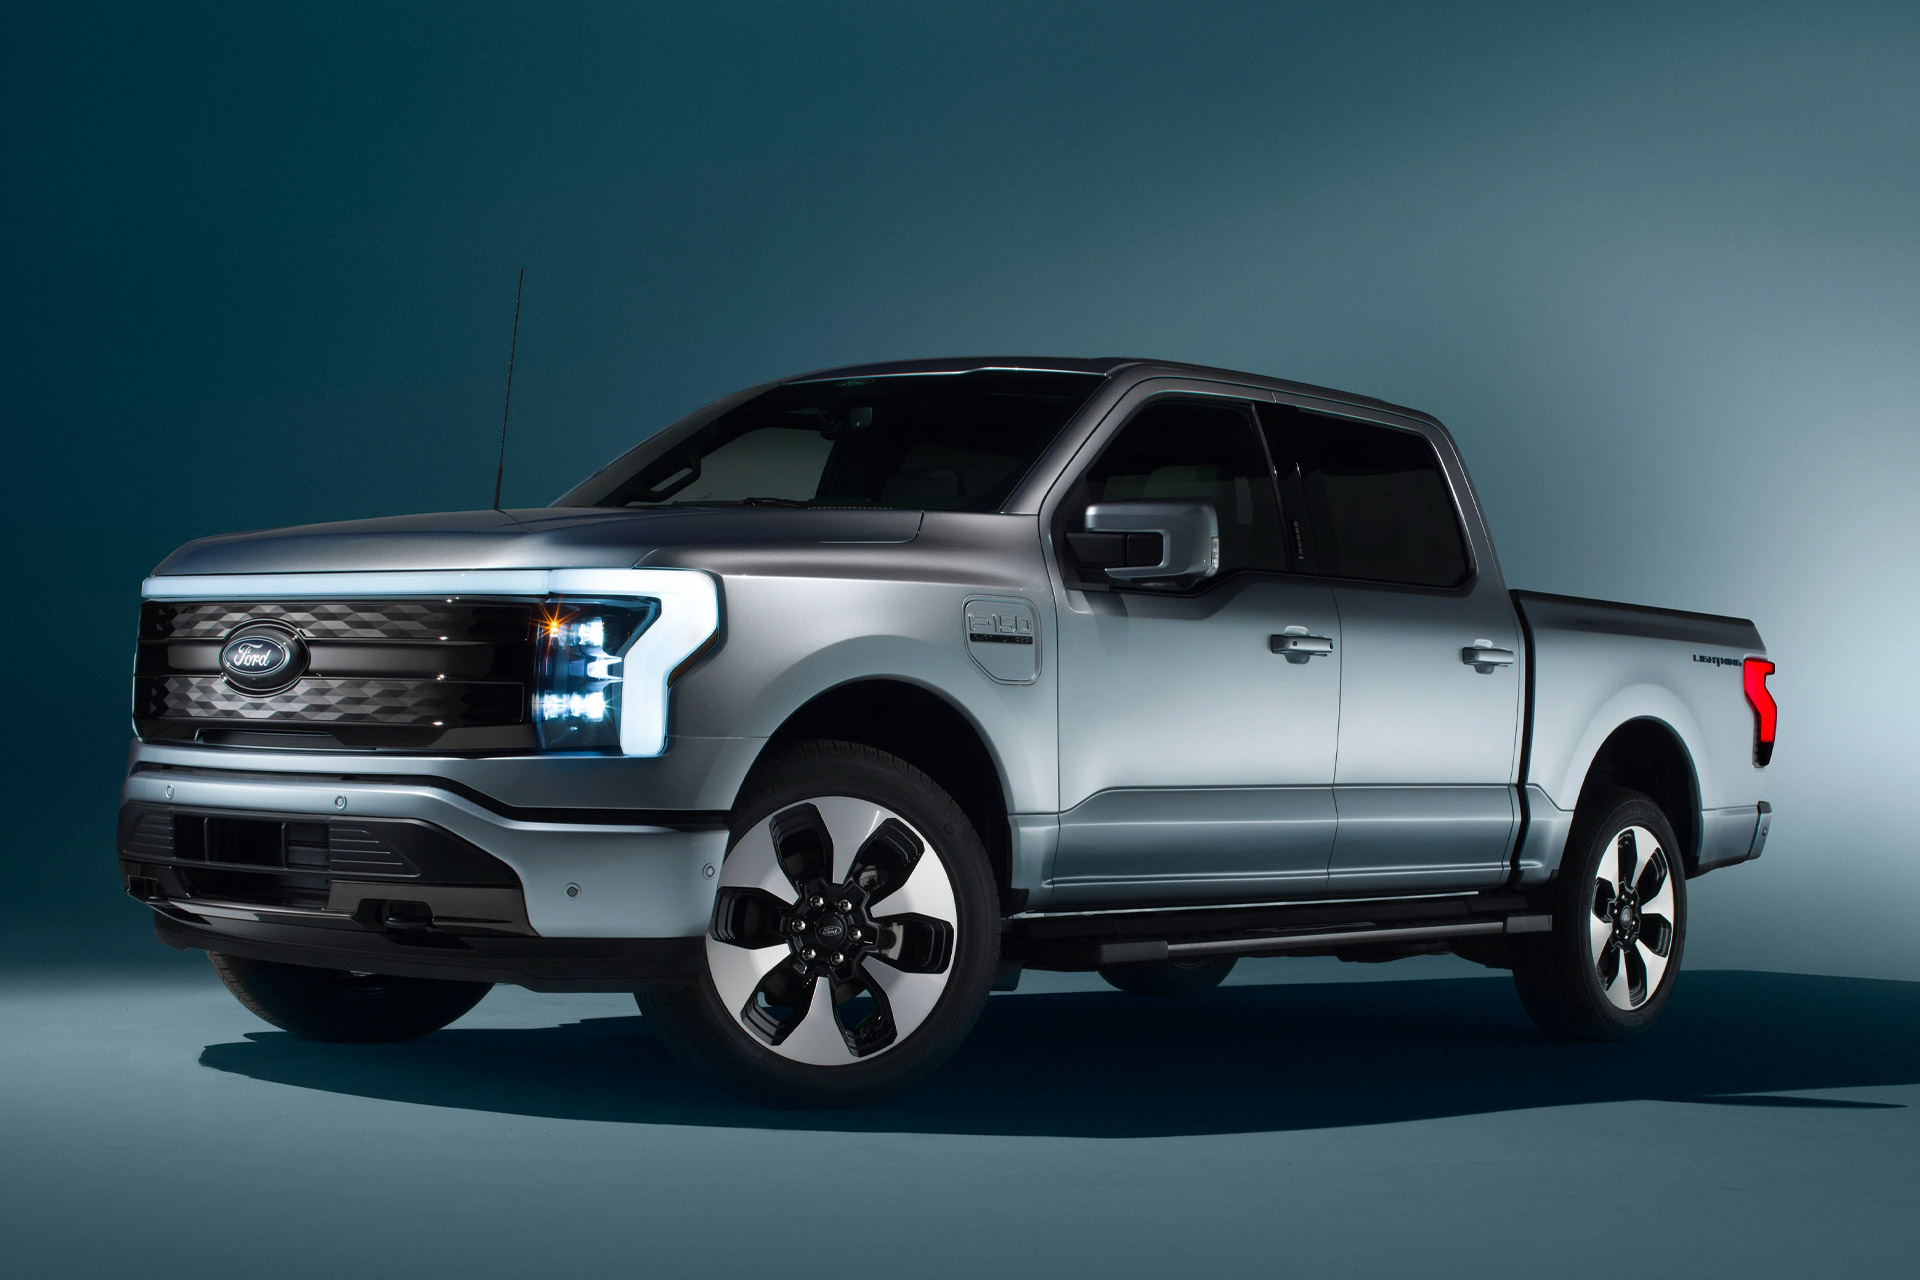 The Future Is Fast! The Ford F150 Lightning Electric Truck